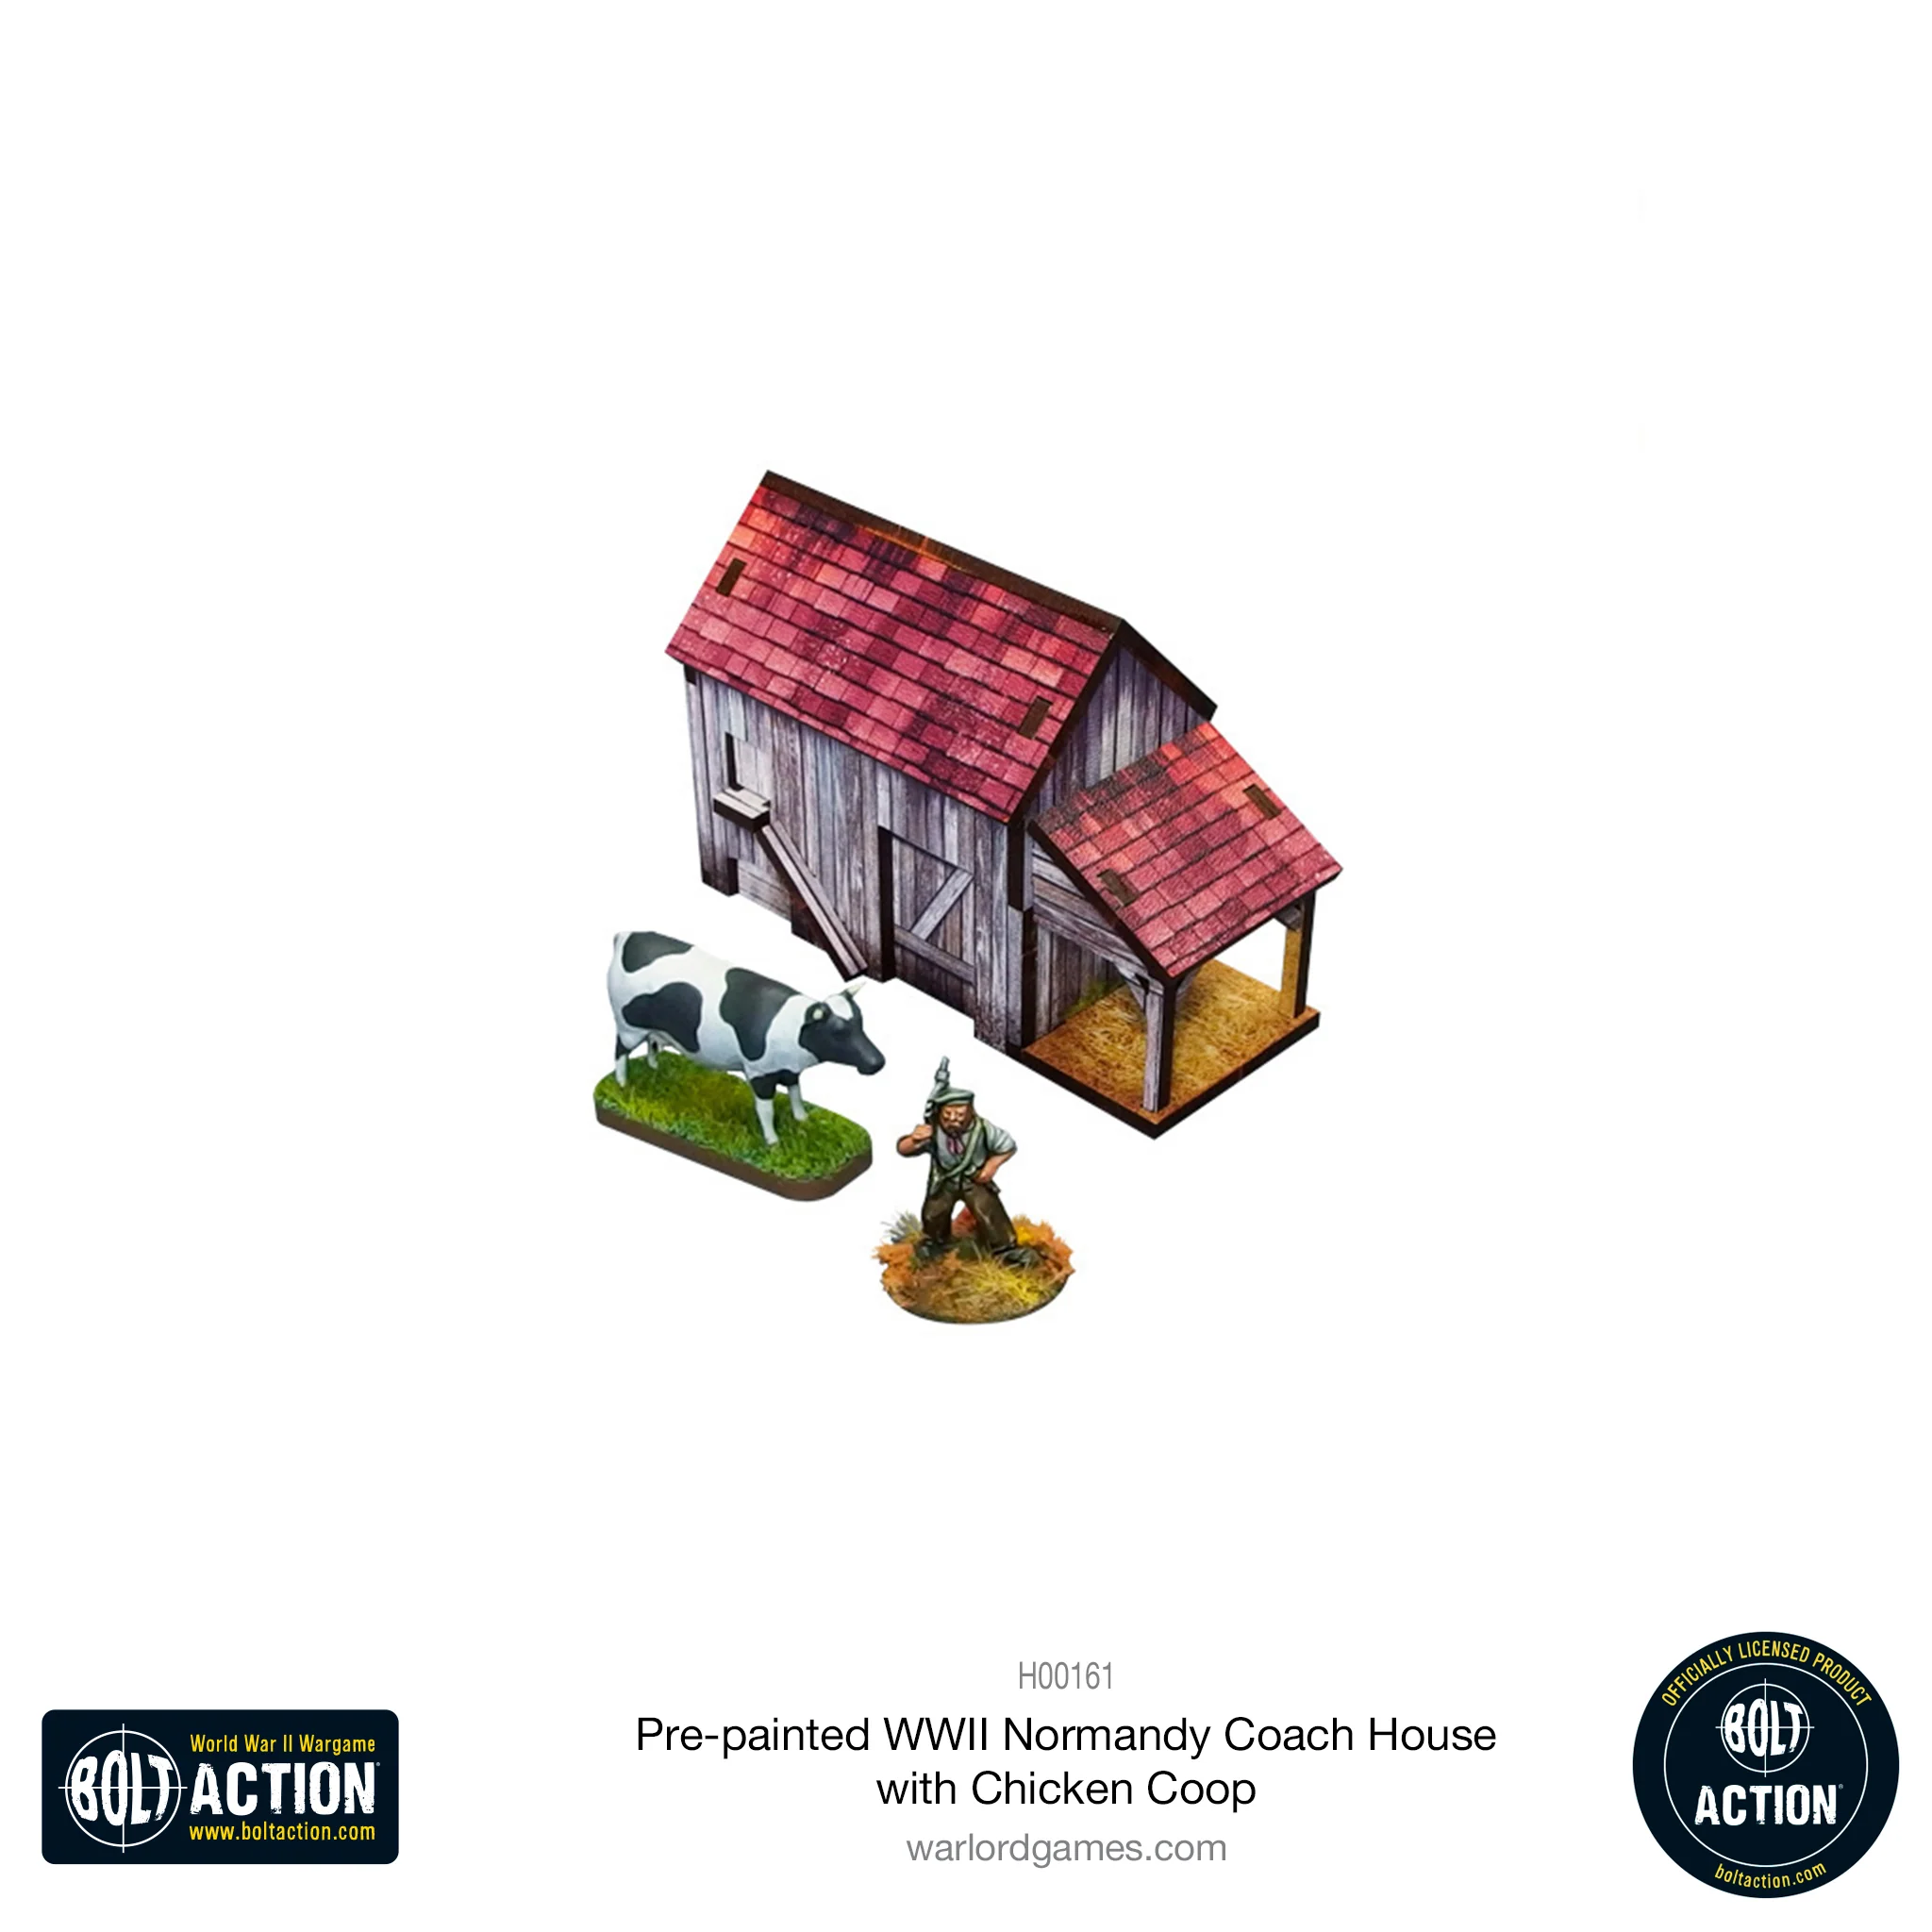 Bolt Action: Pre-Painted WWII Normandy Coach House With Chicken Coop-1711116716-3j5kj.webp